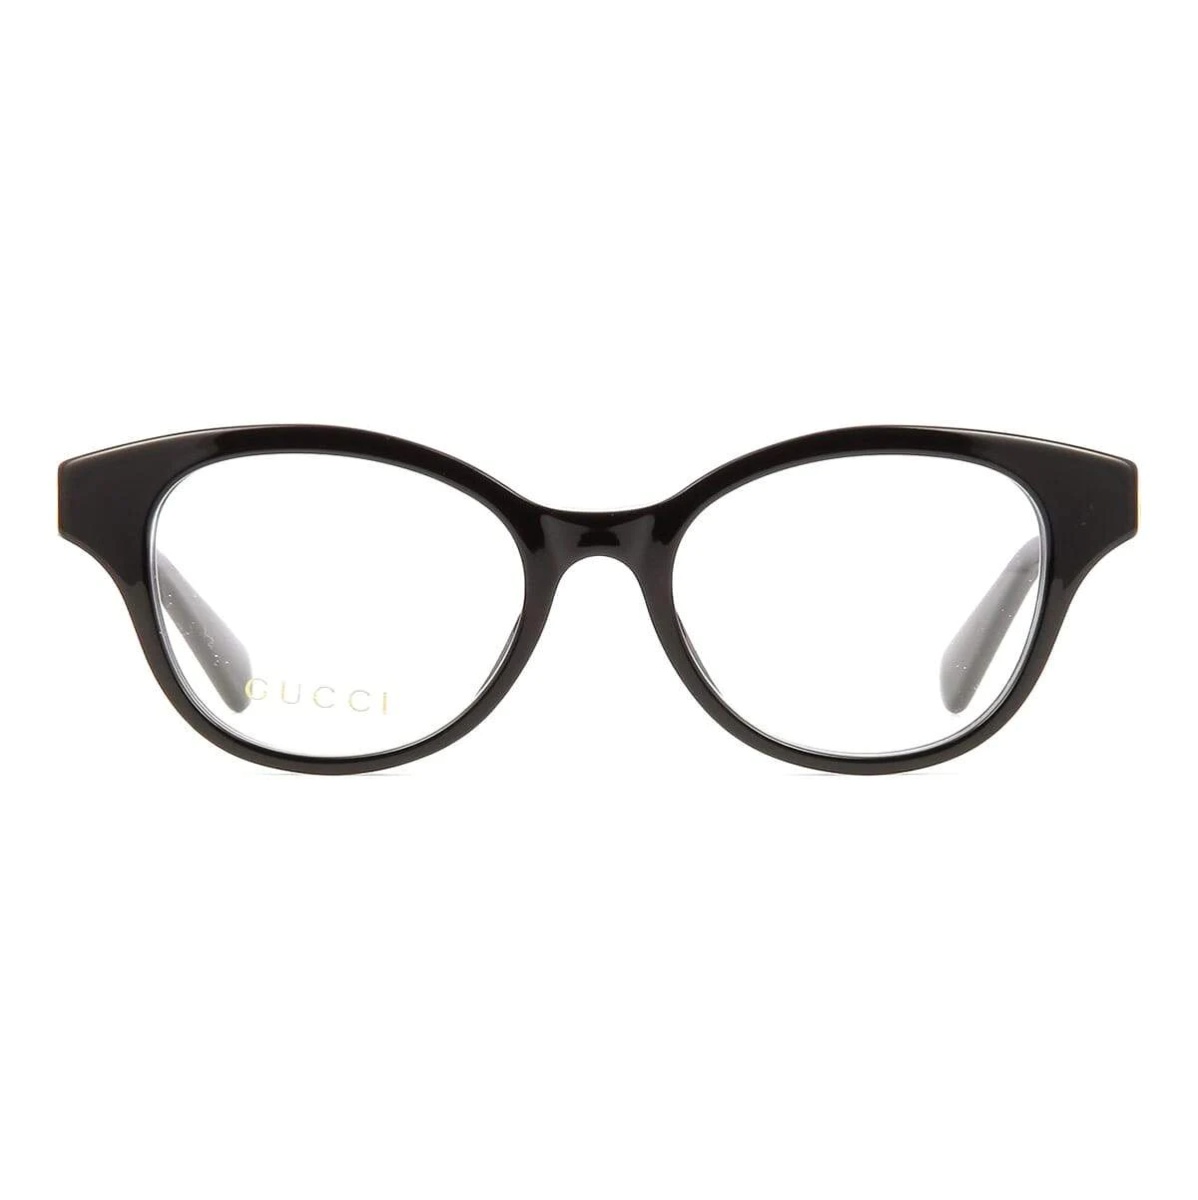  "Gucci 1221O Frame - Premium unisex eyewear offering timeless elegance and exceptional quality."